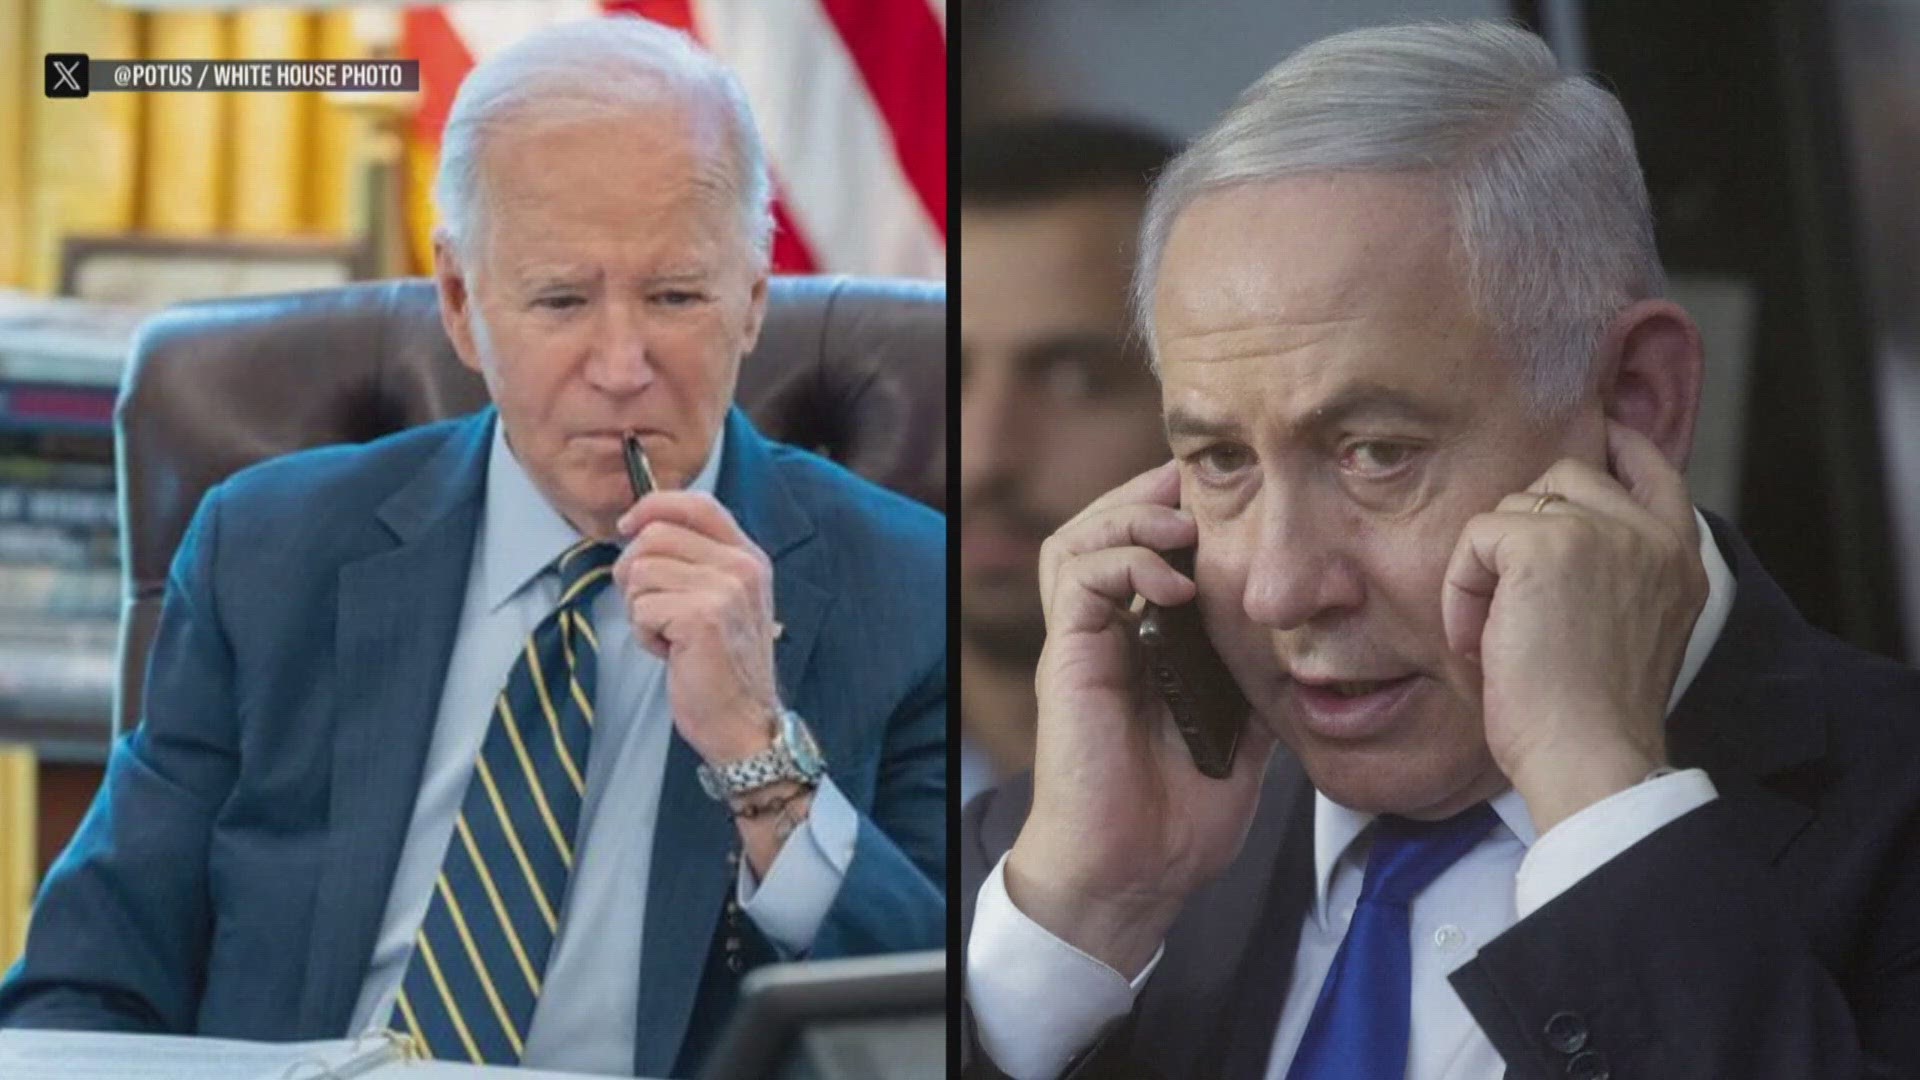 President Biden and Netanyahu spoke Thursday by phone days after Israeli airstrikes killed seven World Central Kitchen workers in Gaza.